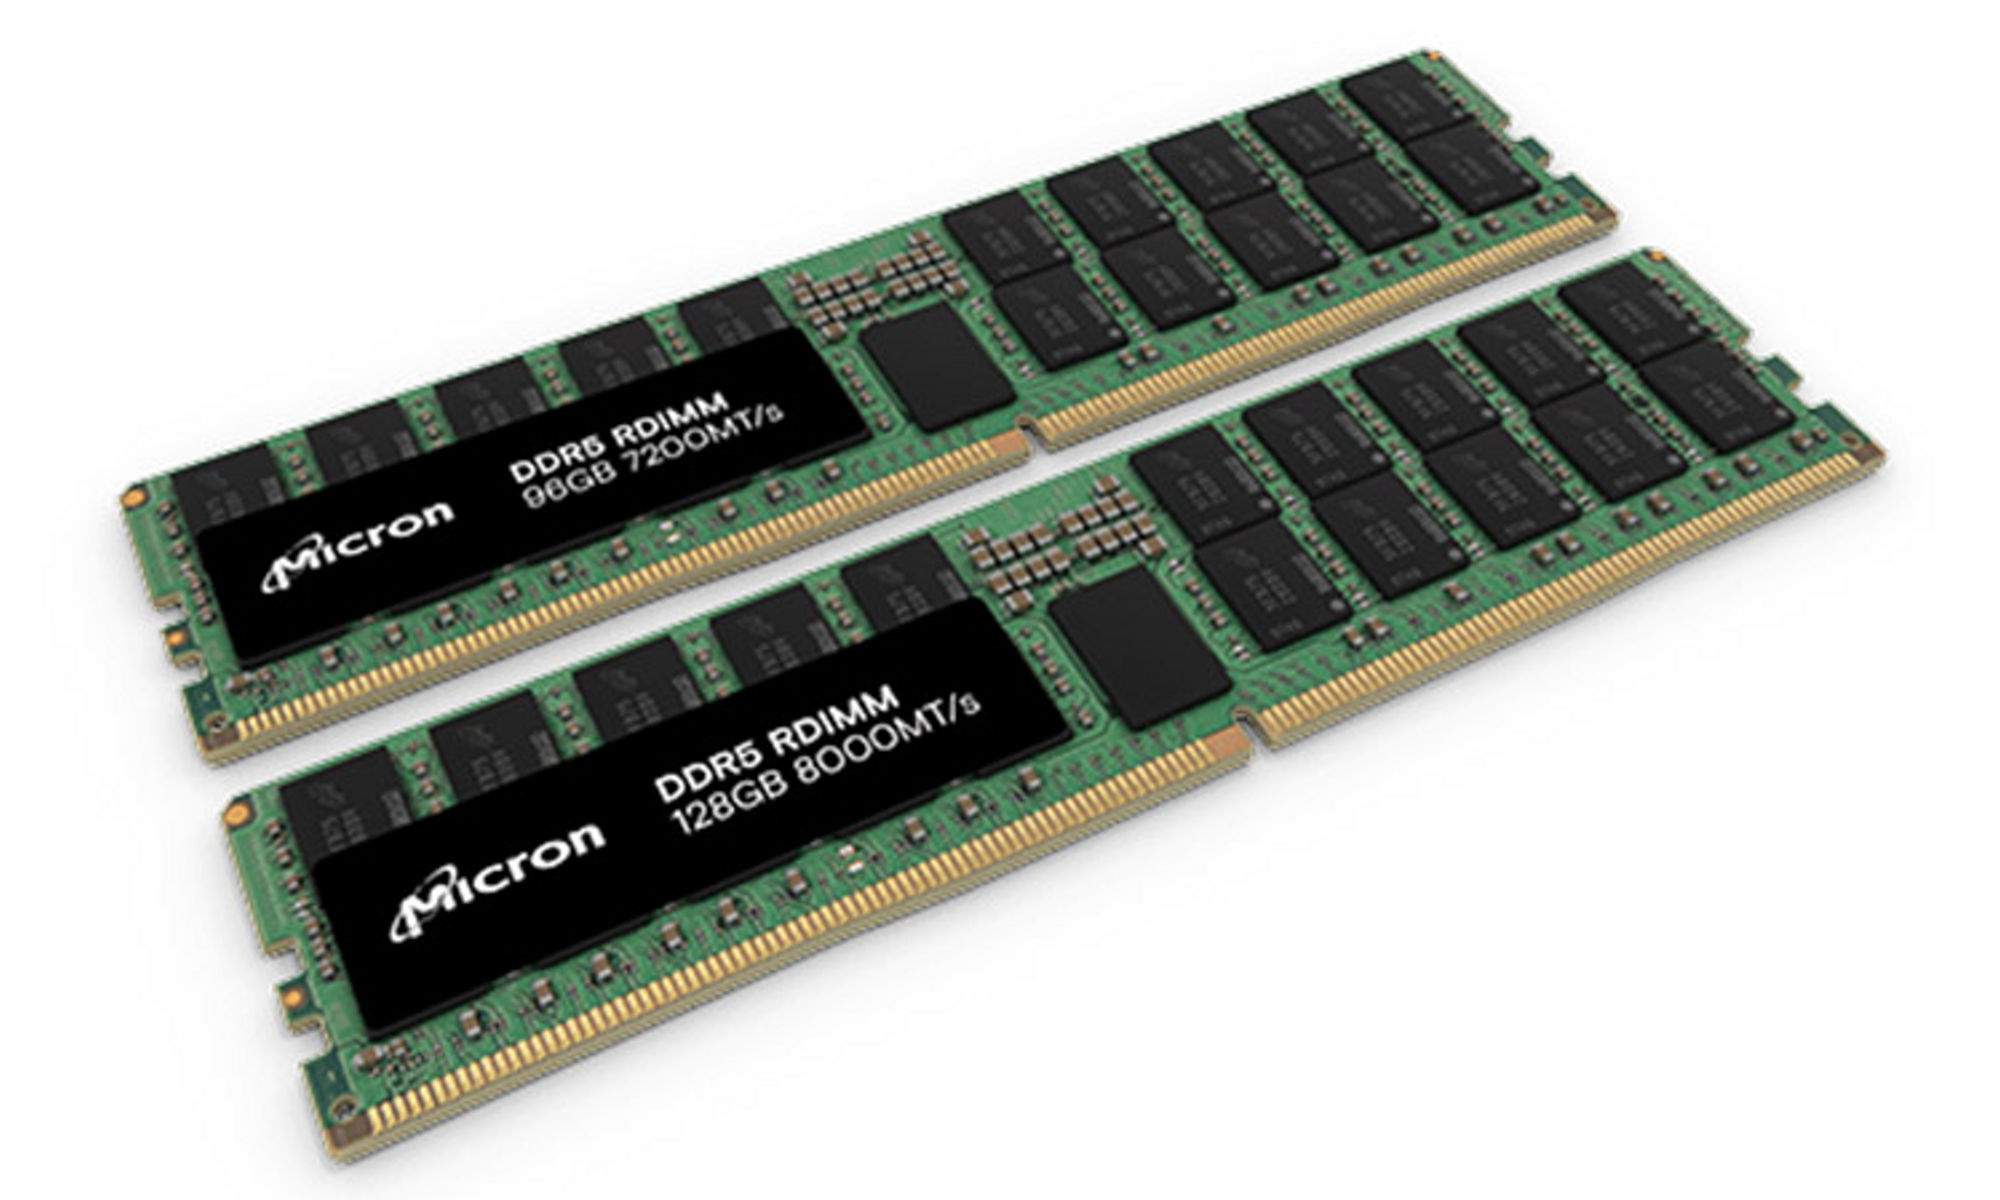 Micron DDR5 RDIMM 96GB and 128GB modules side by side